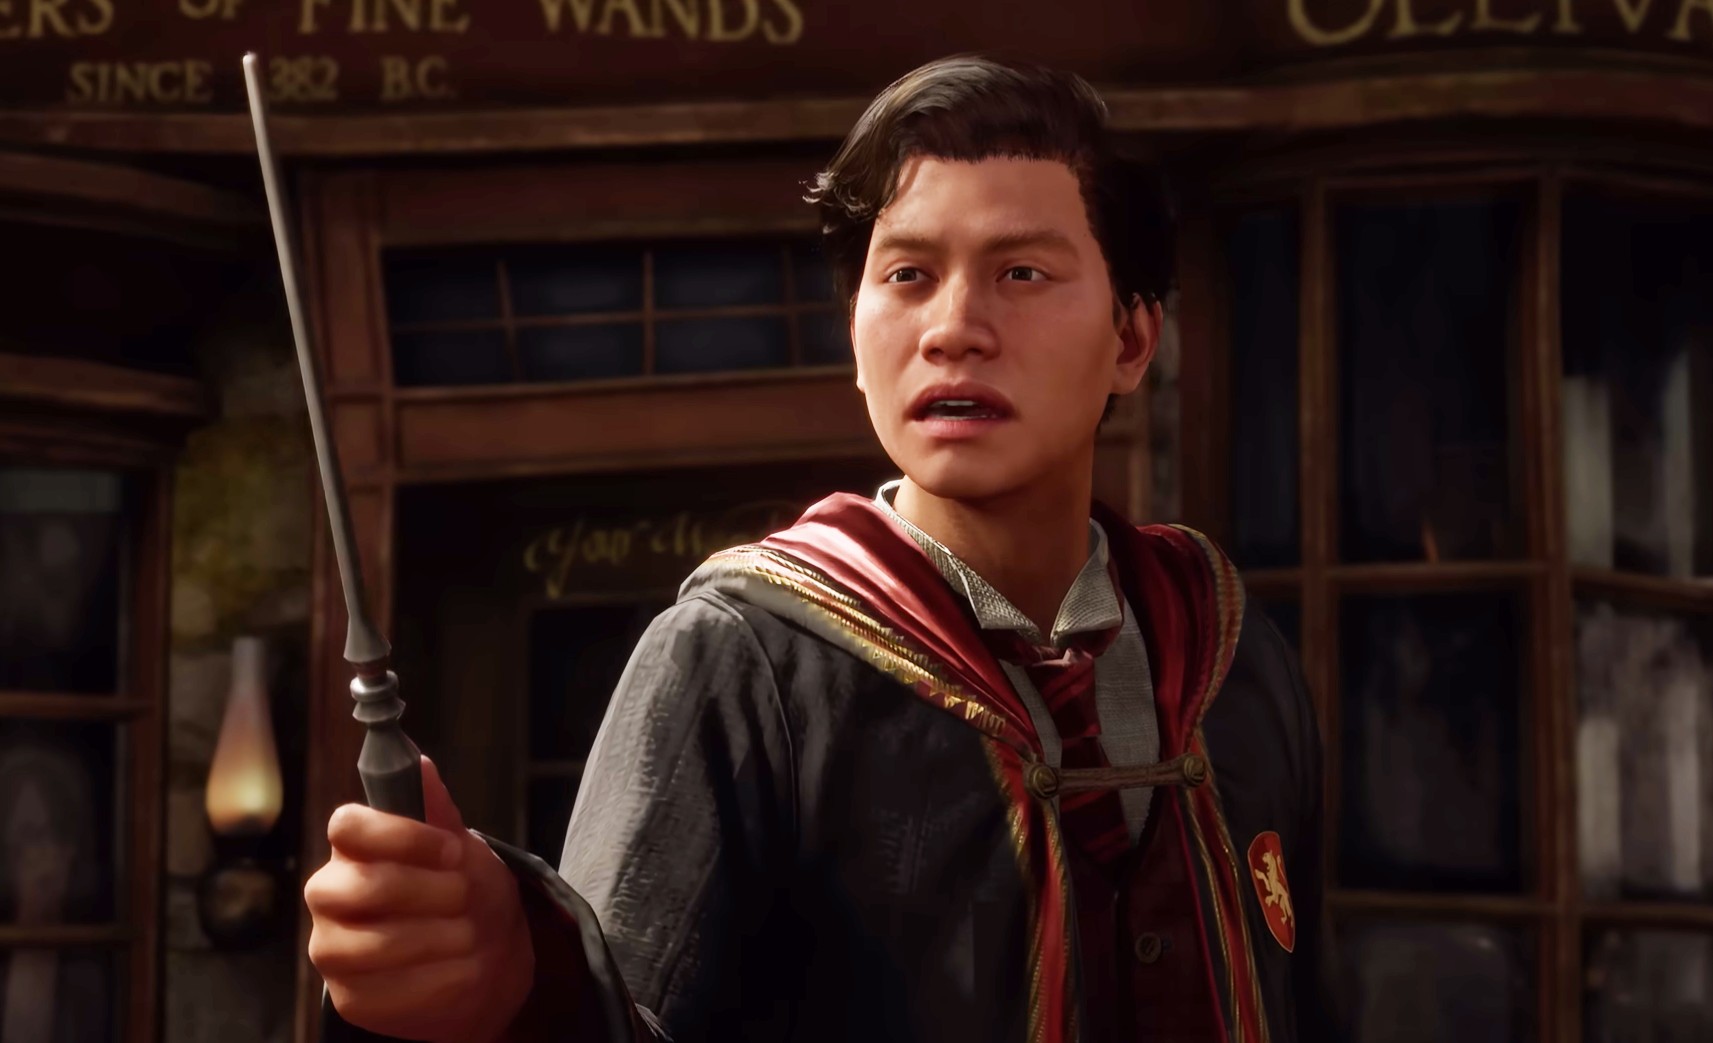 Hogwarts Legacy wants you to relax, with official Harry Potter ASMR